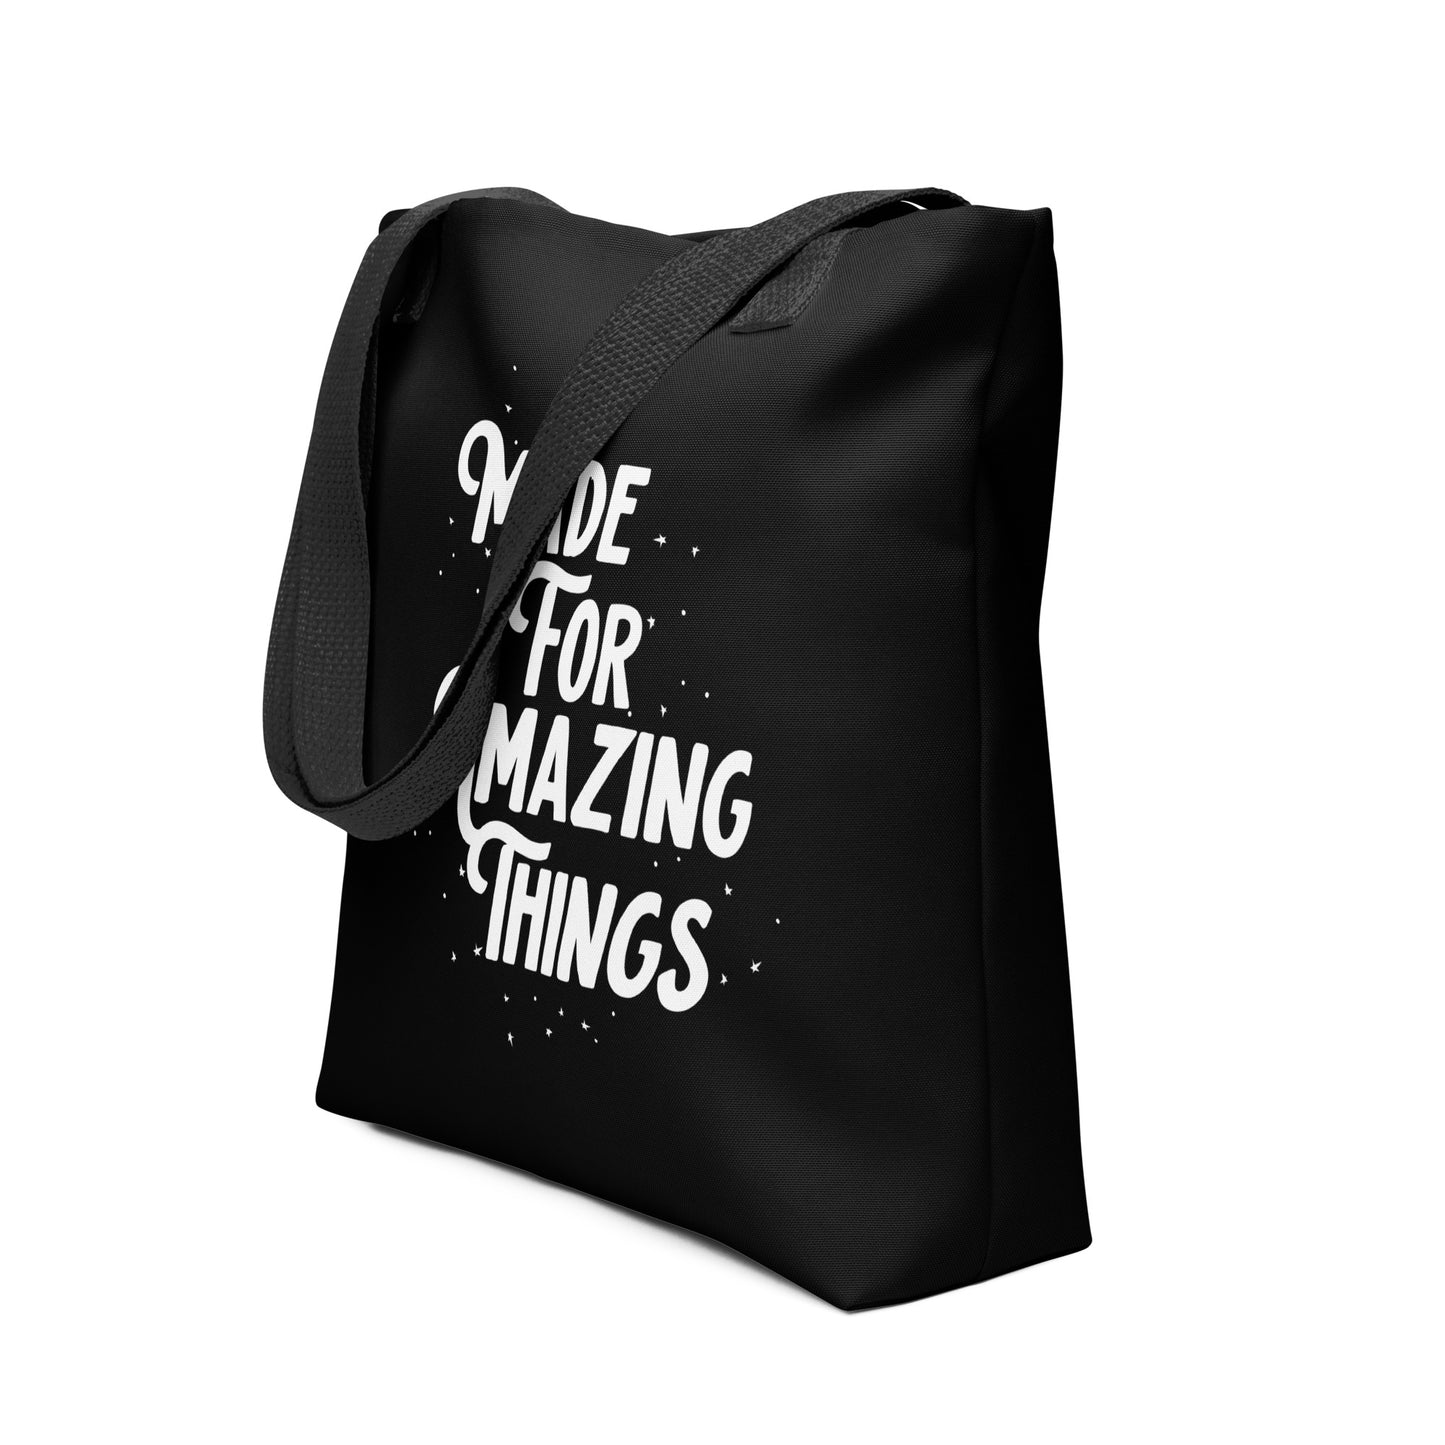 Made for Amazing Things | Tote